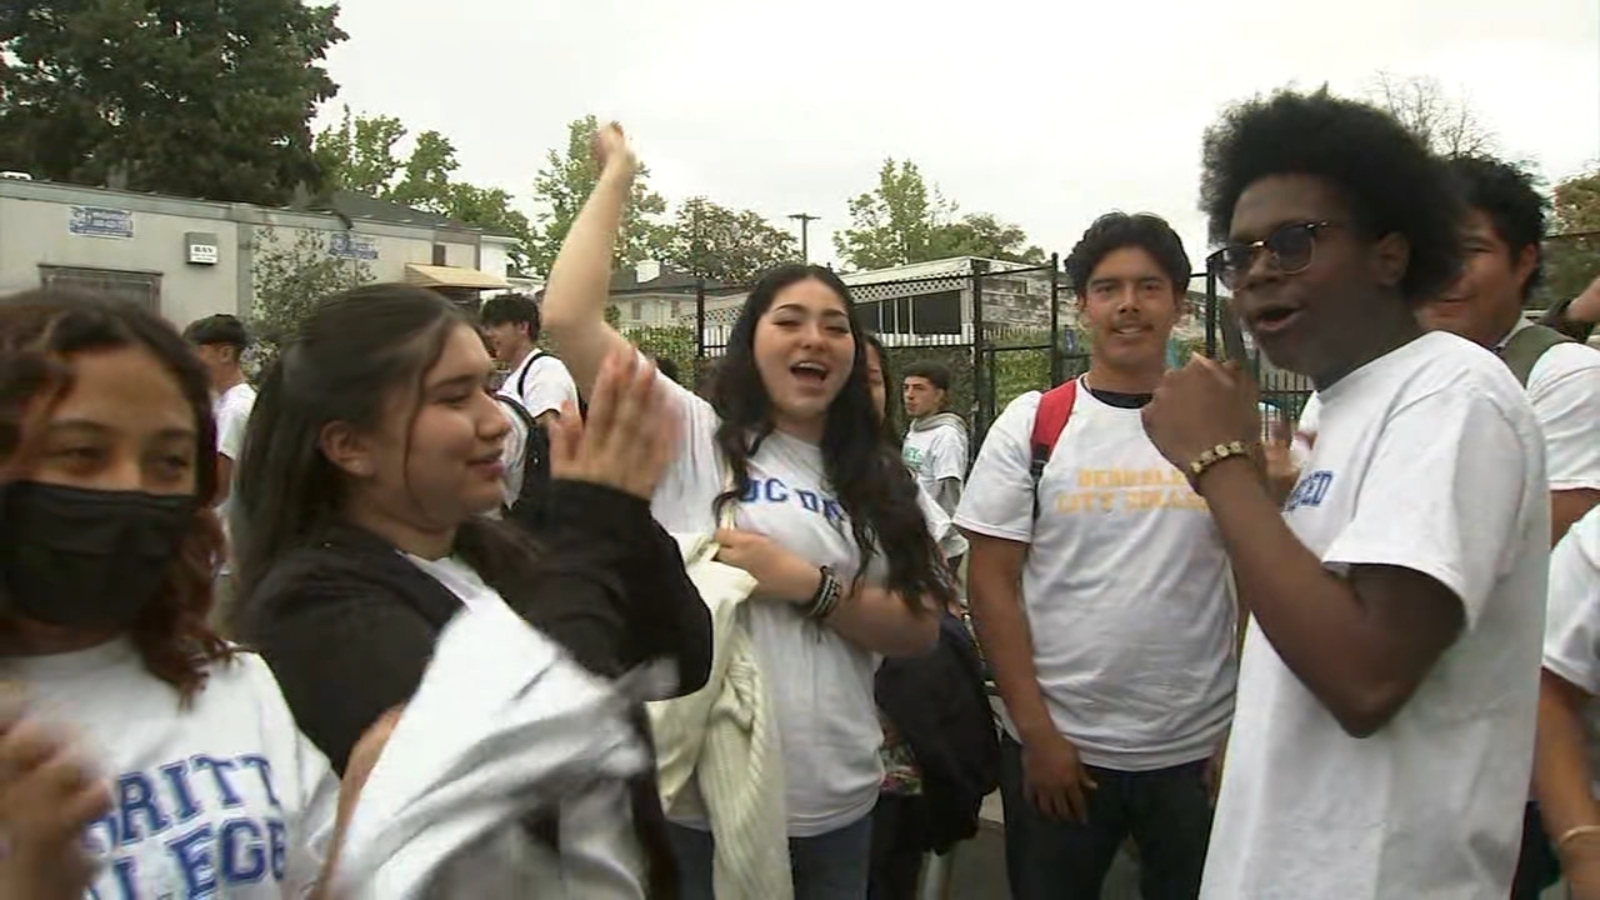 Oakland Unity High School celebrates sending 80% of their seniors to 4-year colleges [Video]